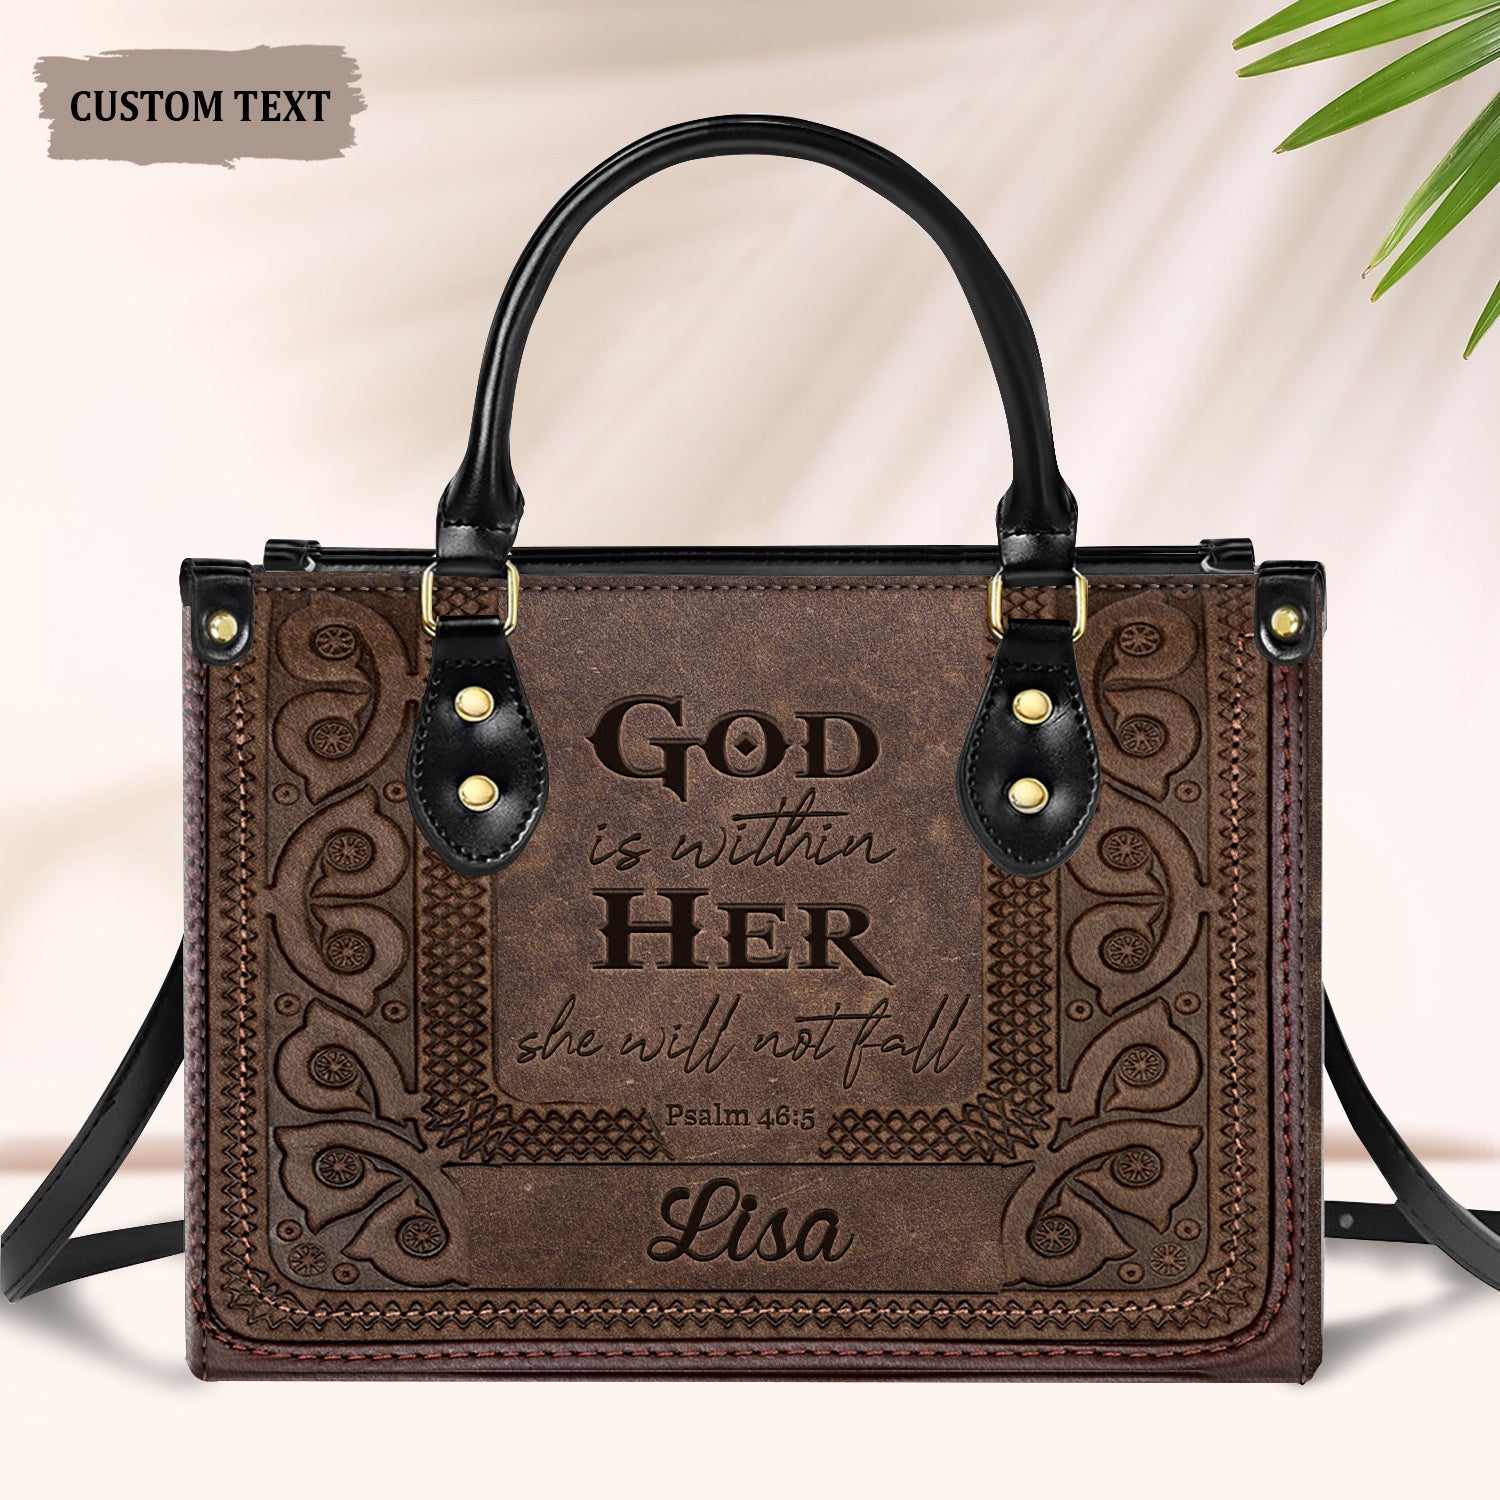 She Will Not Fall Personalized Leather Handbag